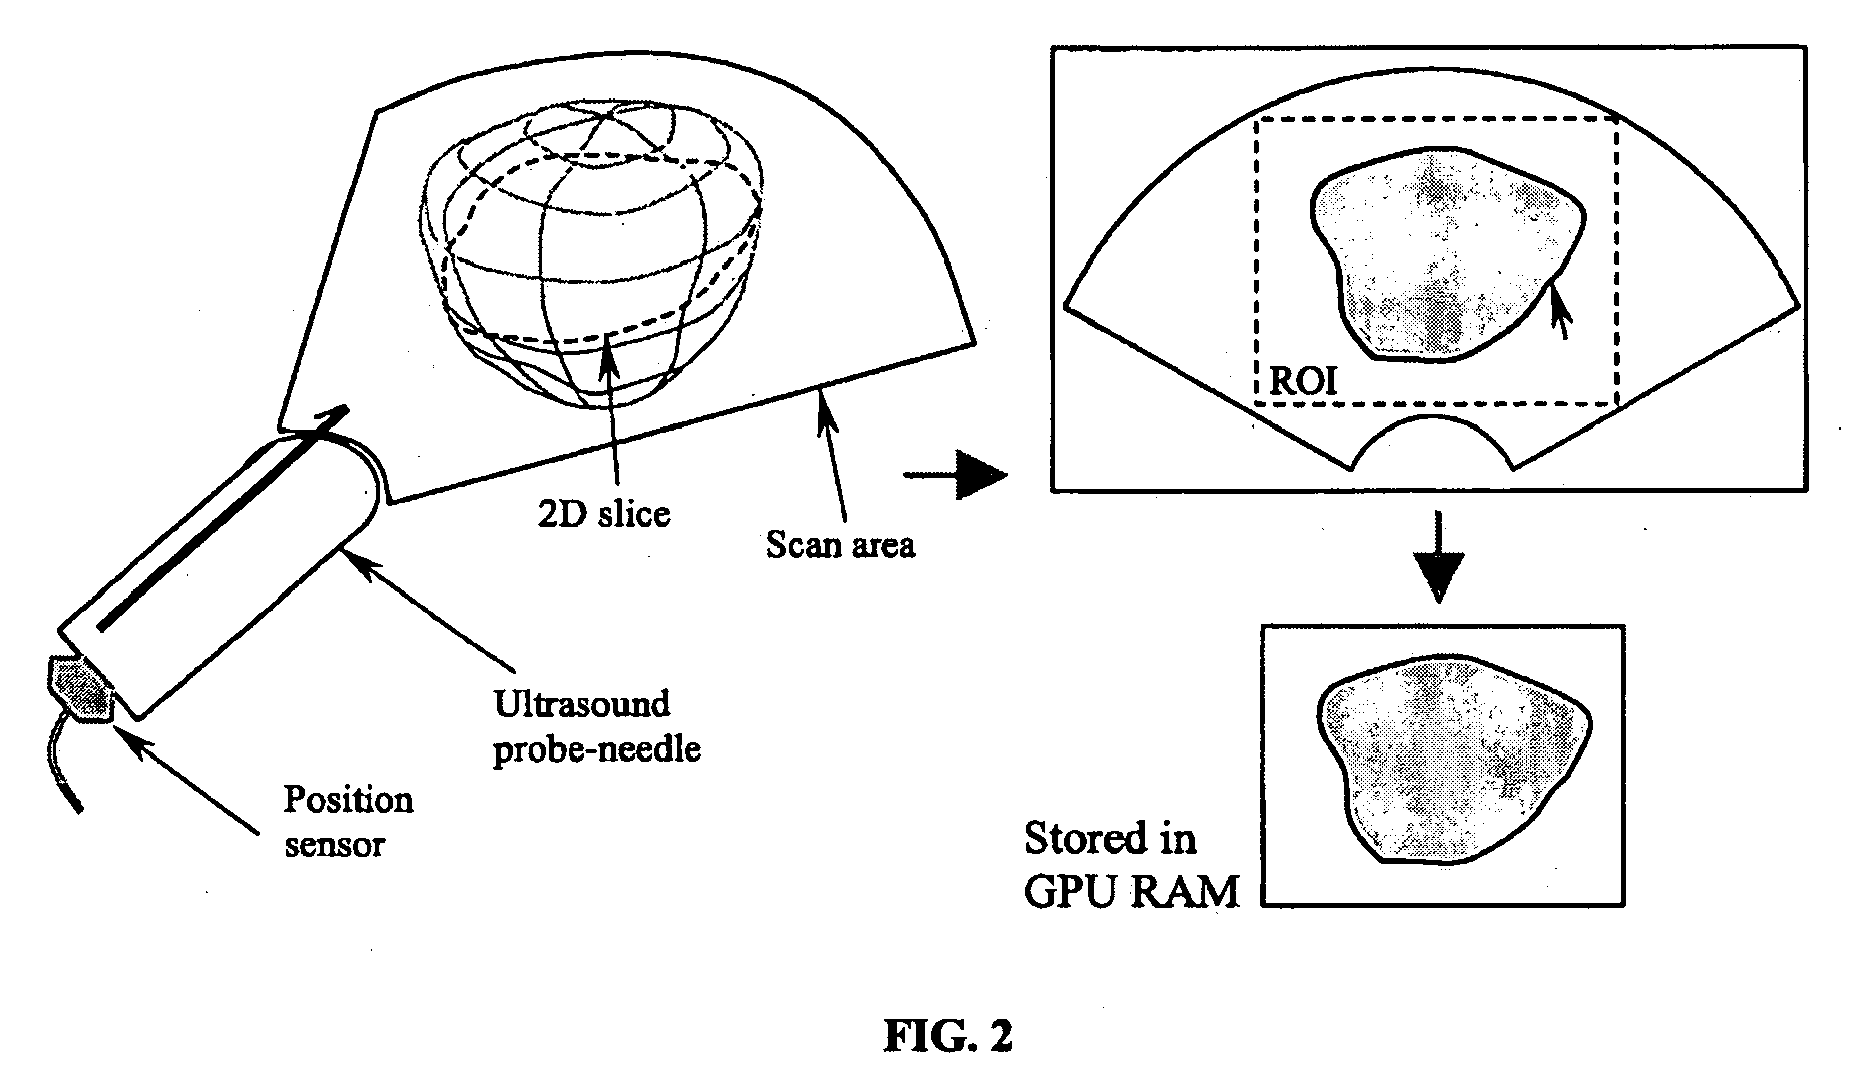 Apparatus for guiding towards targets during motion using GPU processing